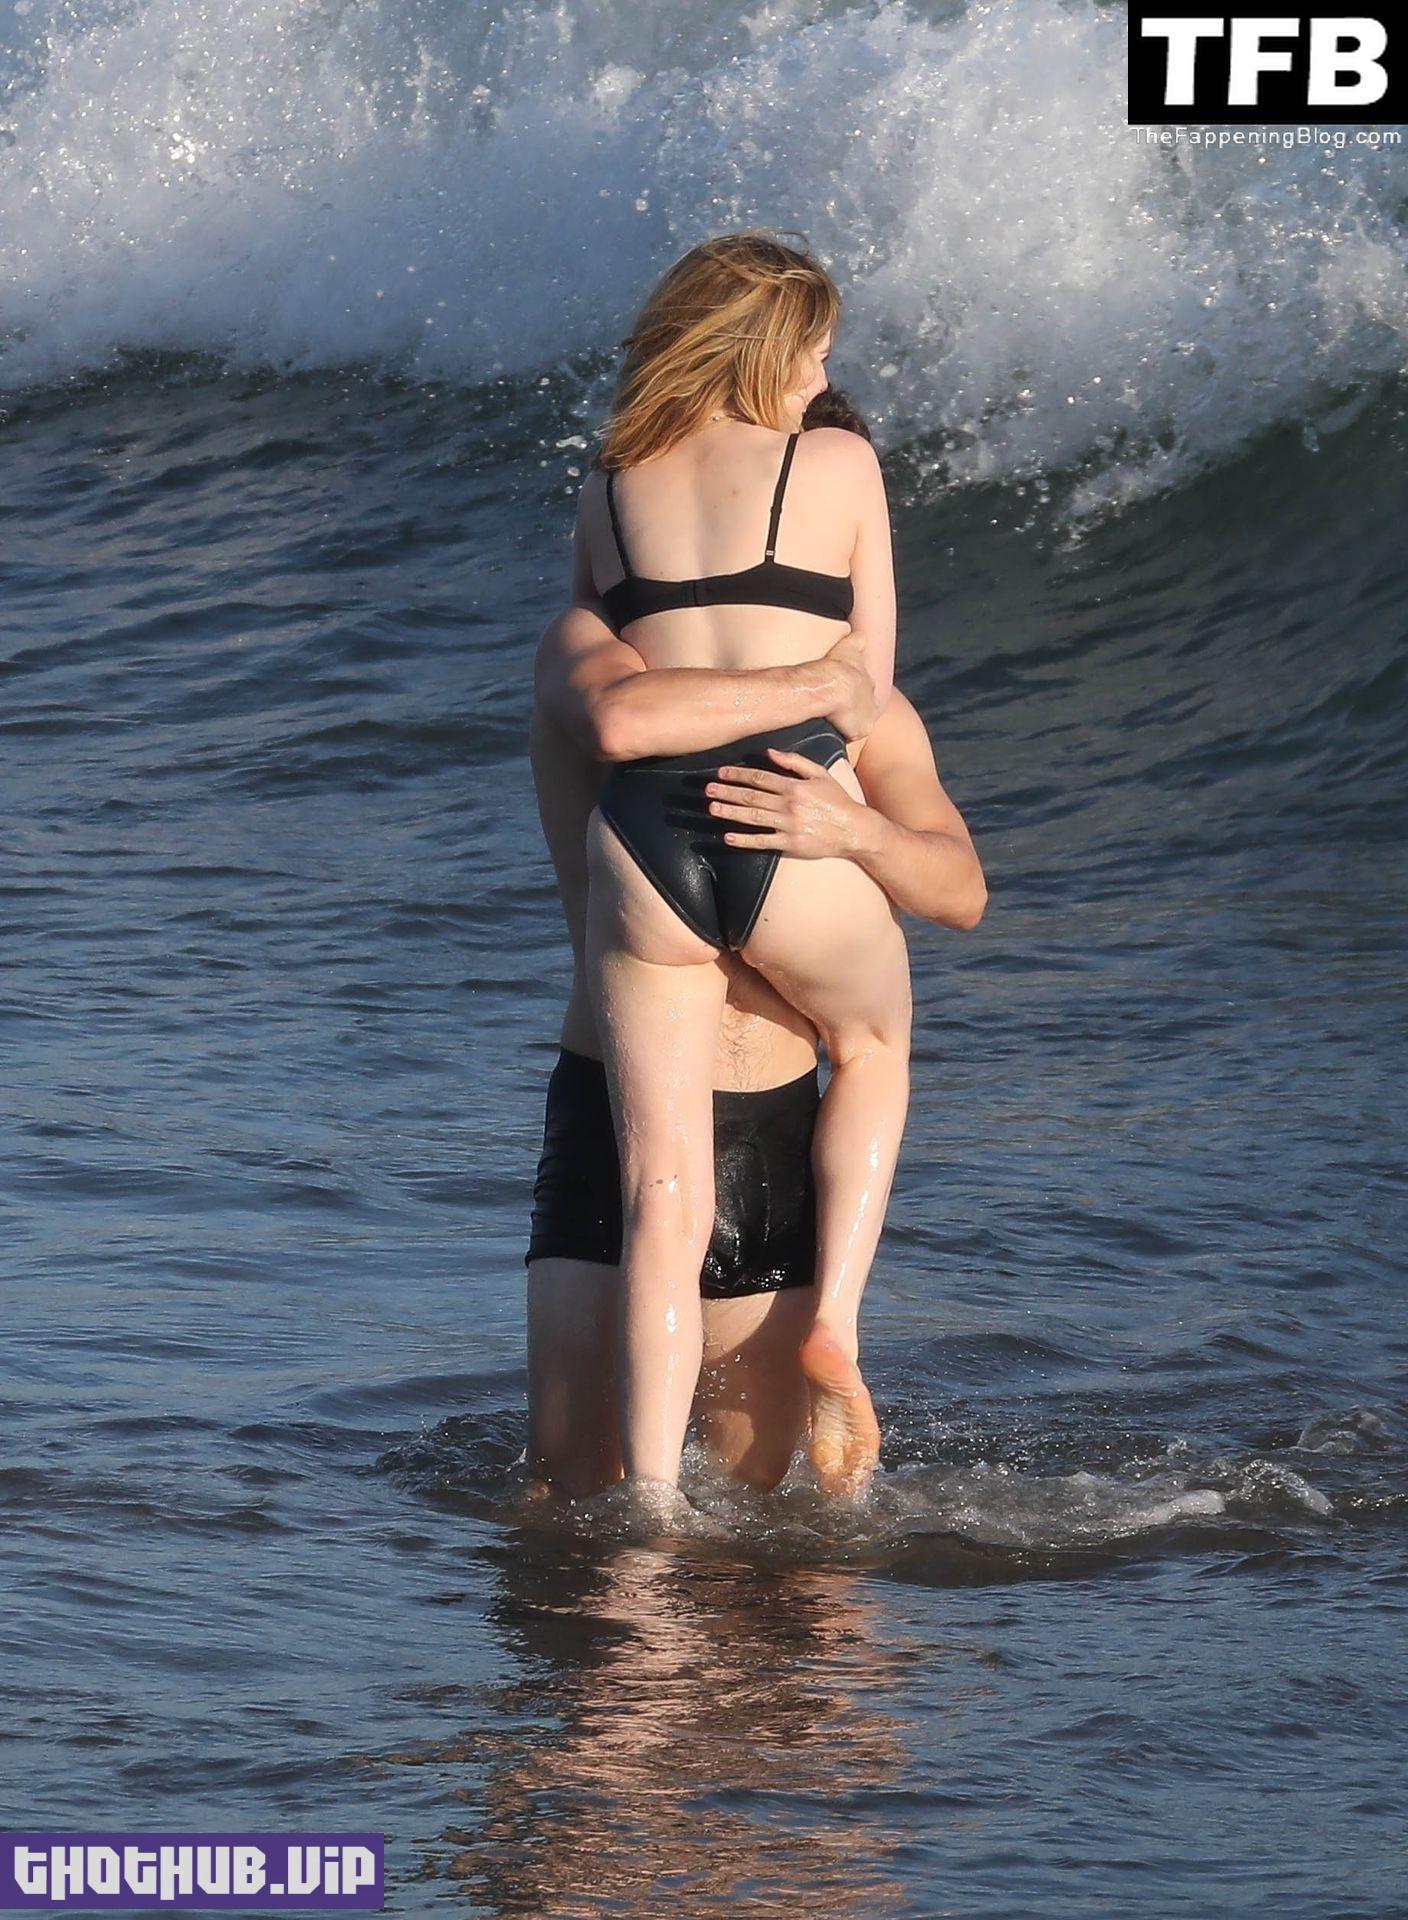 Lucy Boynton Sexy The Fappening Blog 13